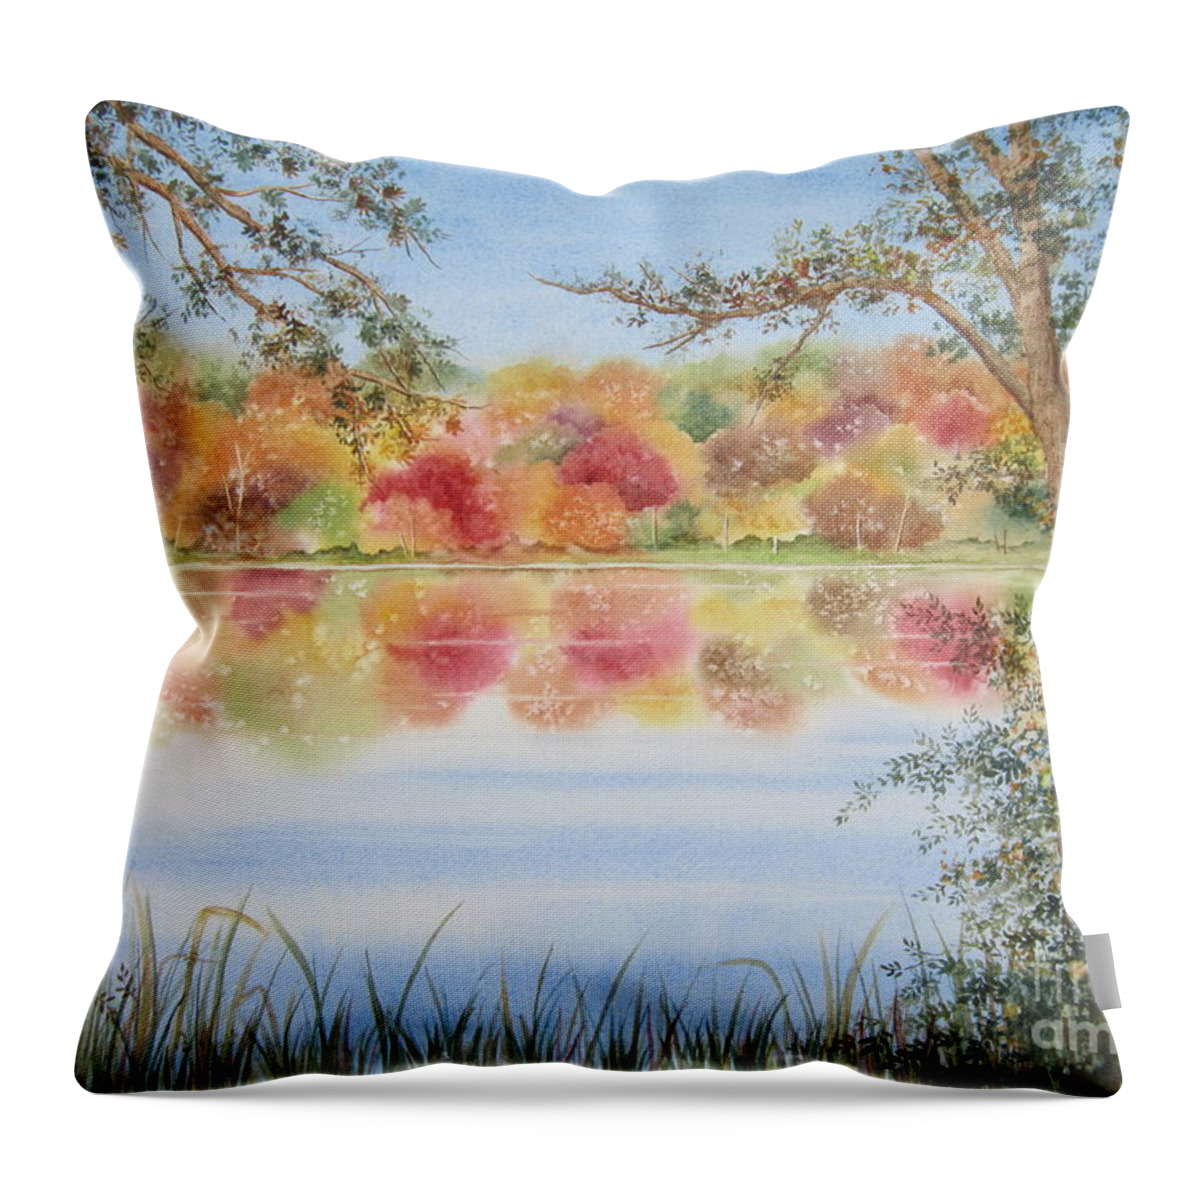 Landscape Throw Pillow featuring the painting Marshall's Pond by Deborah Ronglien